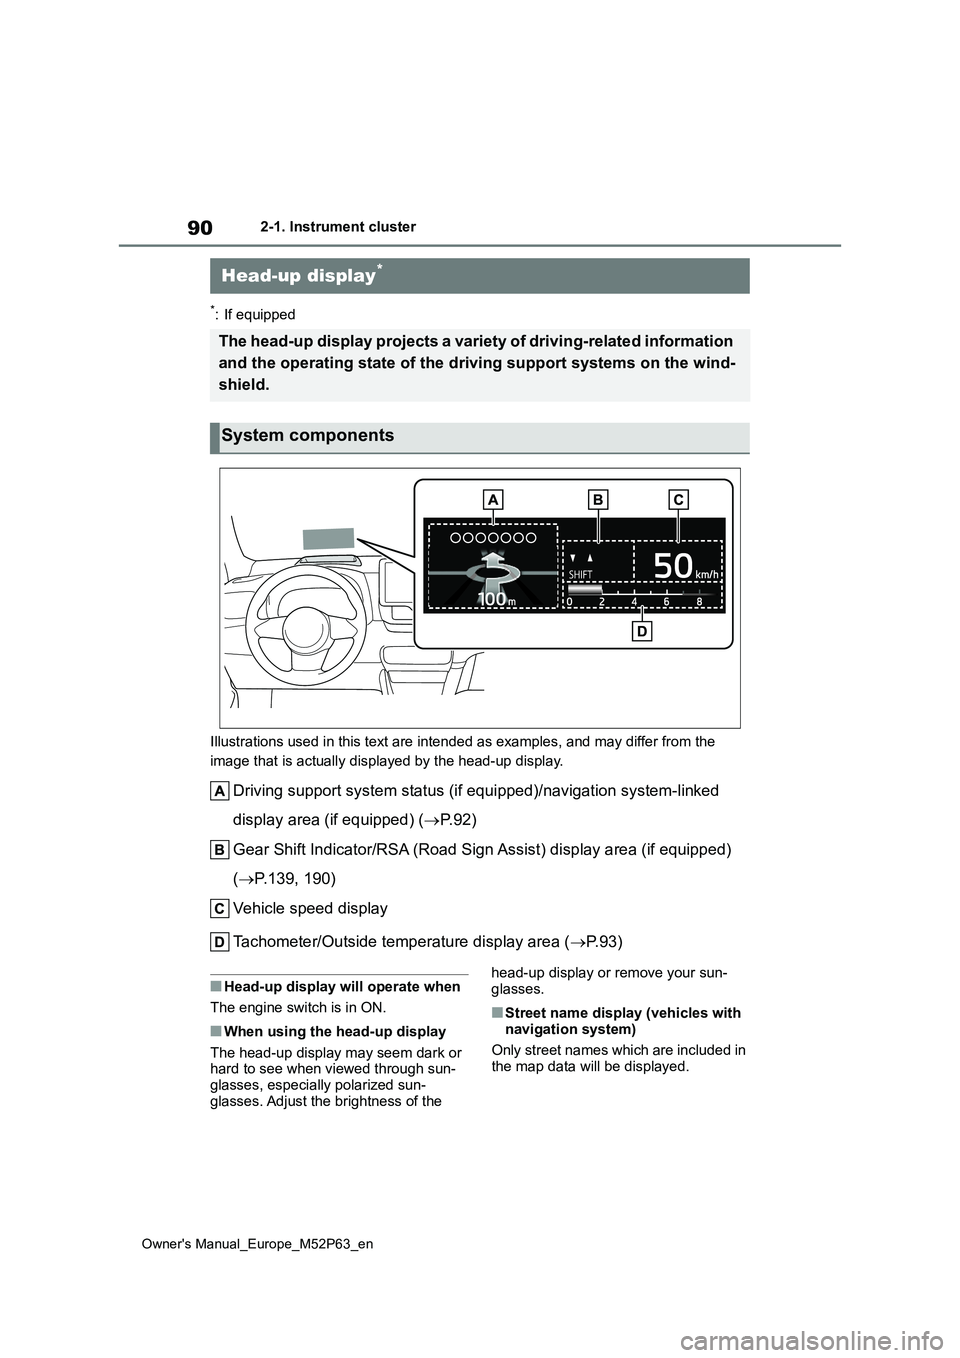 TOYOTA GR YARIS 2023  Owners Manual 90
Owner's Manual_Europe_M52P63_en
2-1. Instrument cluster
*: If equipped 
Illustrations used in this text are intended as examples, and m ay differ from the  
image that is actually displayed by 